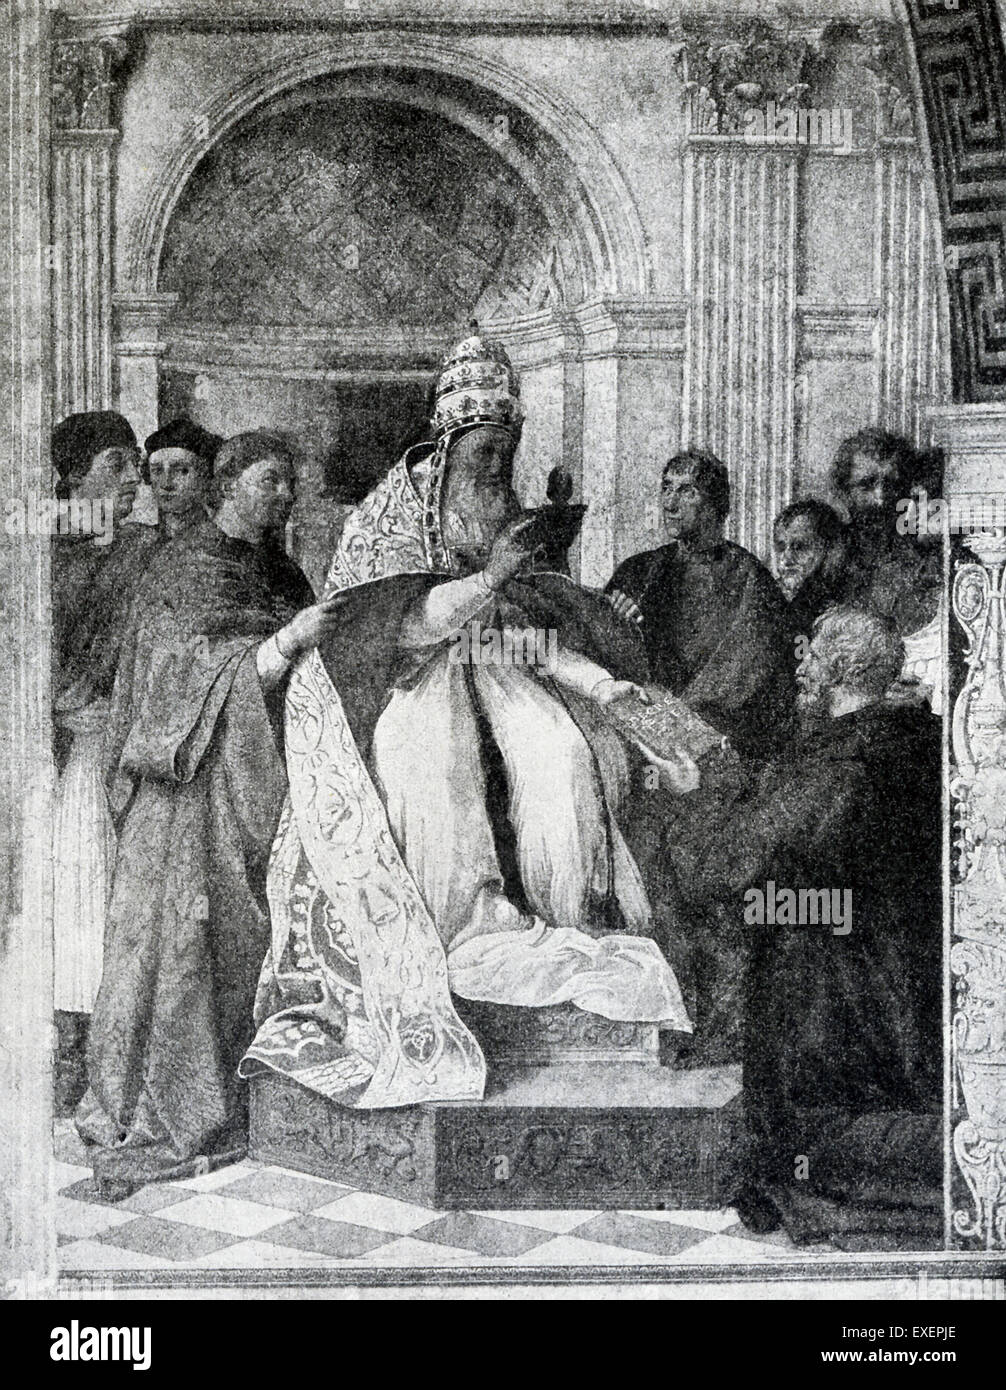 This scene depicts Pope Gregory IX (served 1227-1241) approving the Decretals received from St. Raymond de Penafort, a doctor of civil and canon law. Gregory had summoned Raymond to Rome in 1230 to help rearrange and codify canon law. The painting is credited to Raphael's workshop and is in the Vatican. The painting is credited to Raphael's workshop and is in the Vatican. In this scene the pope is actually a depiction  of Julius II, pope who commissioned Raphael/workshop to do this painting in 1511. Stock Photo